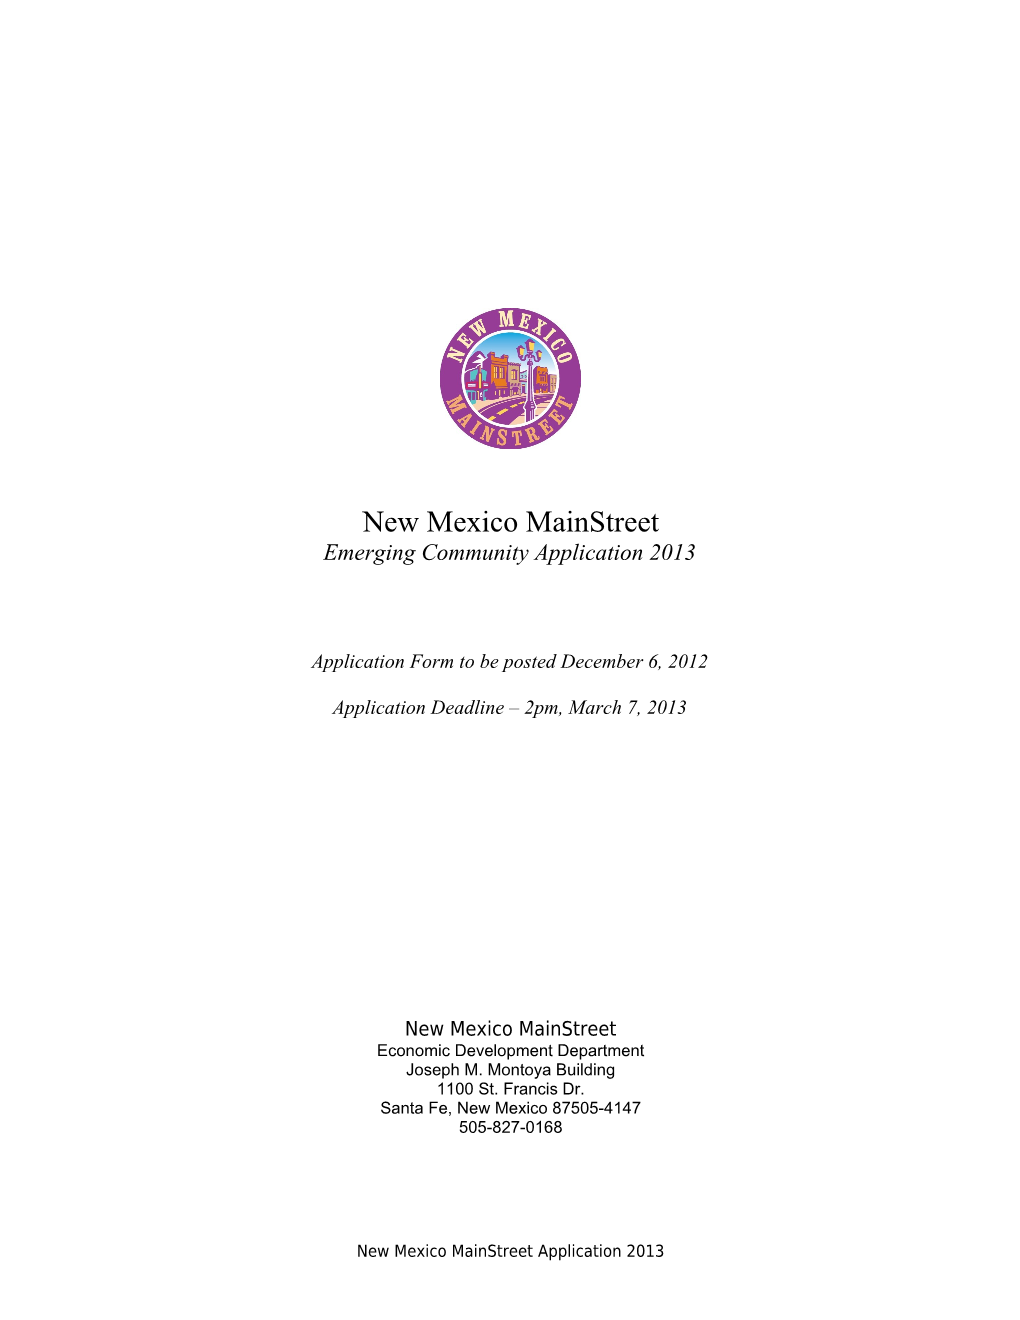 New Mexico Mainstreet Emerging Community Application 2013